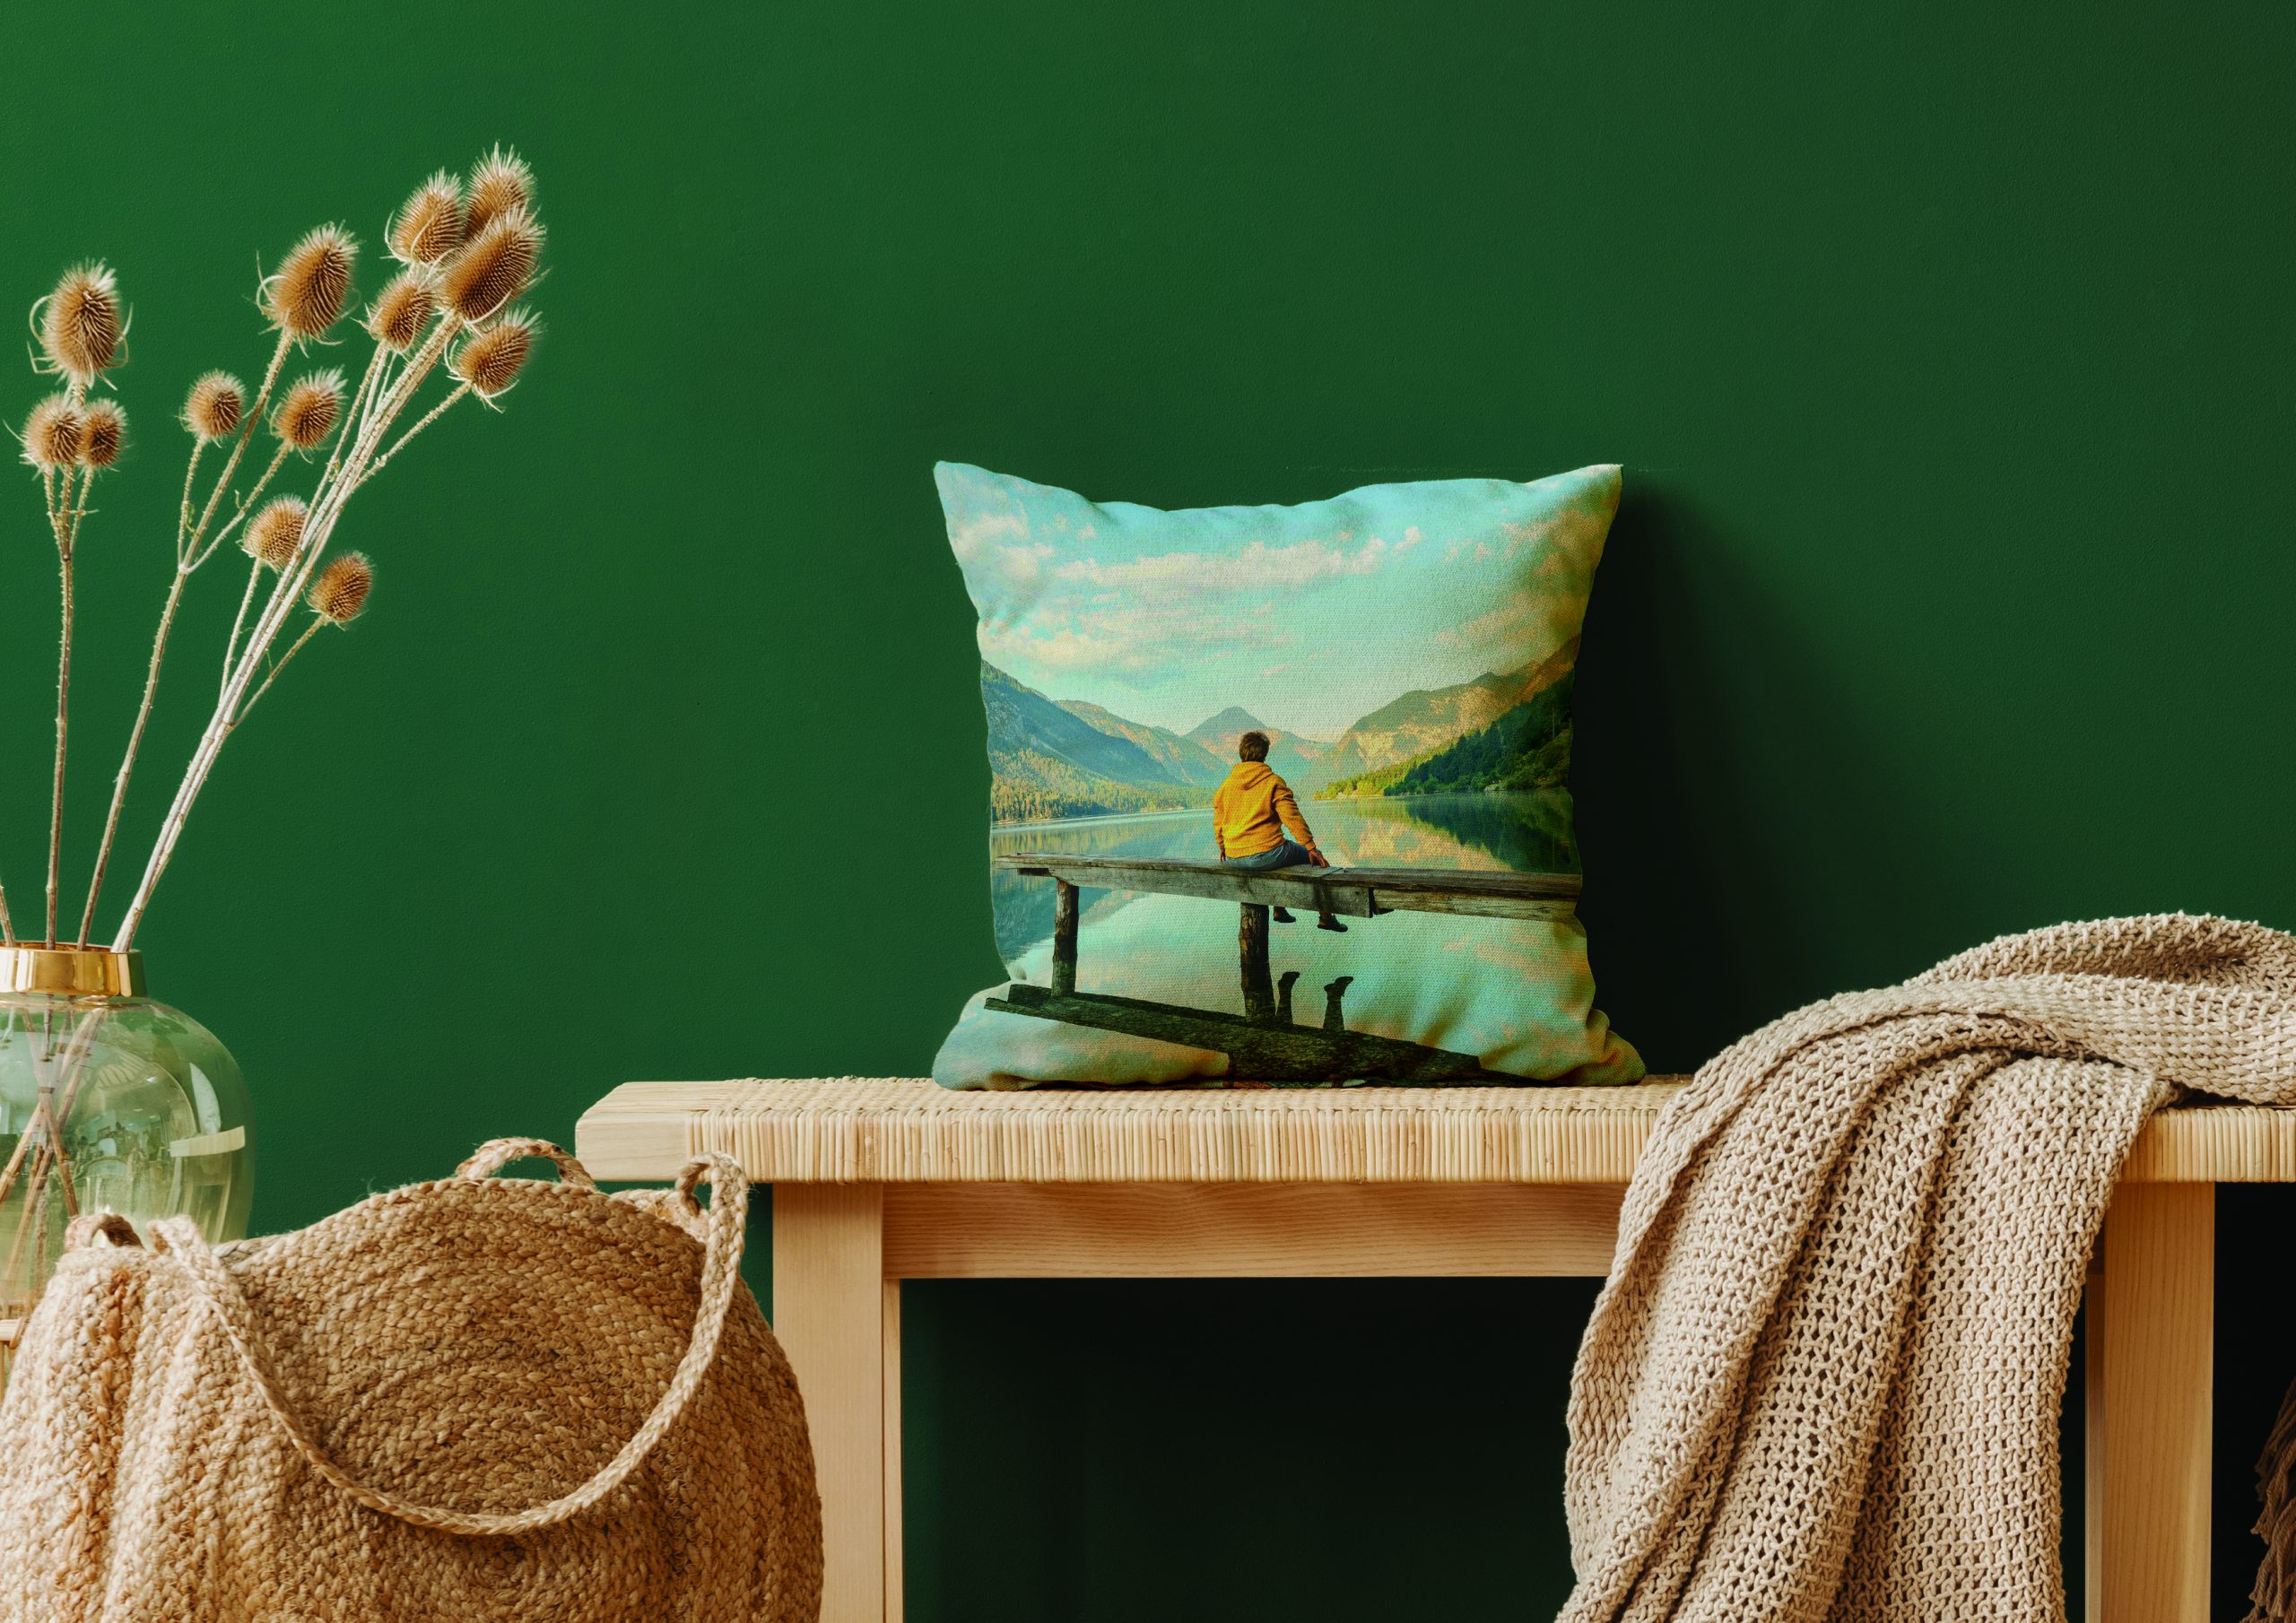 Bring Self-Care Home: Decor Tips for a Healing Space